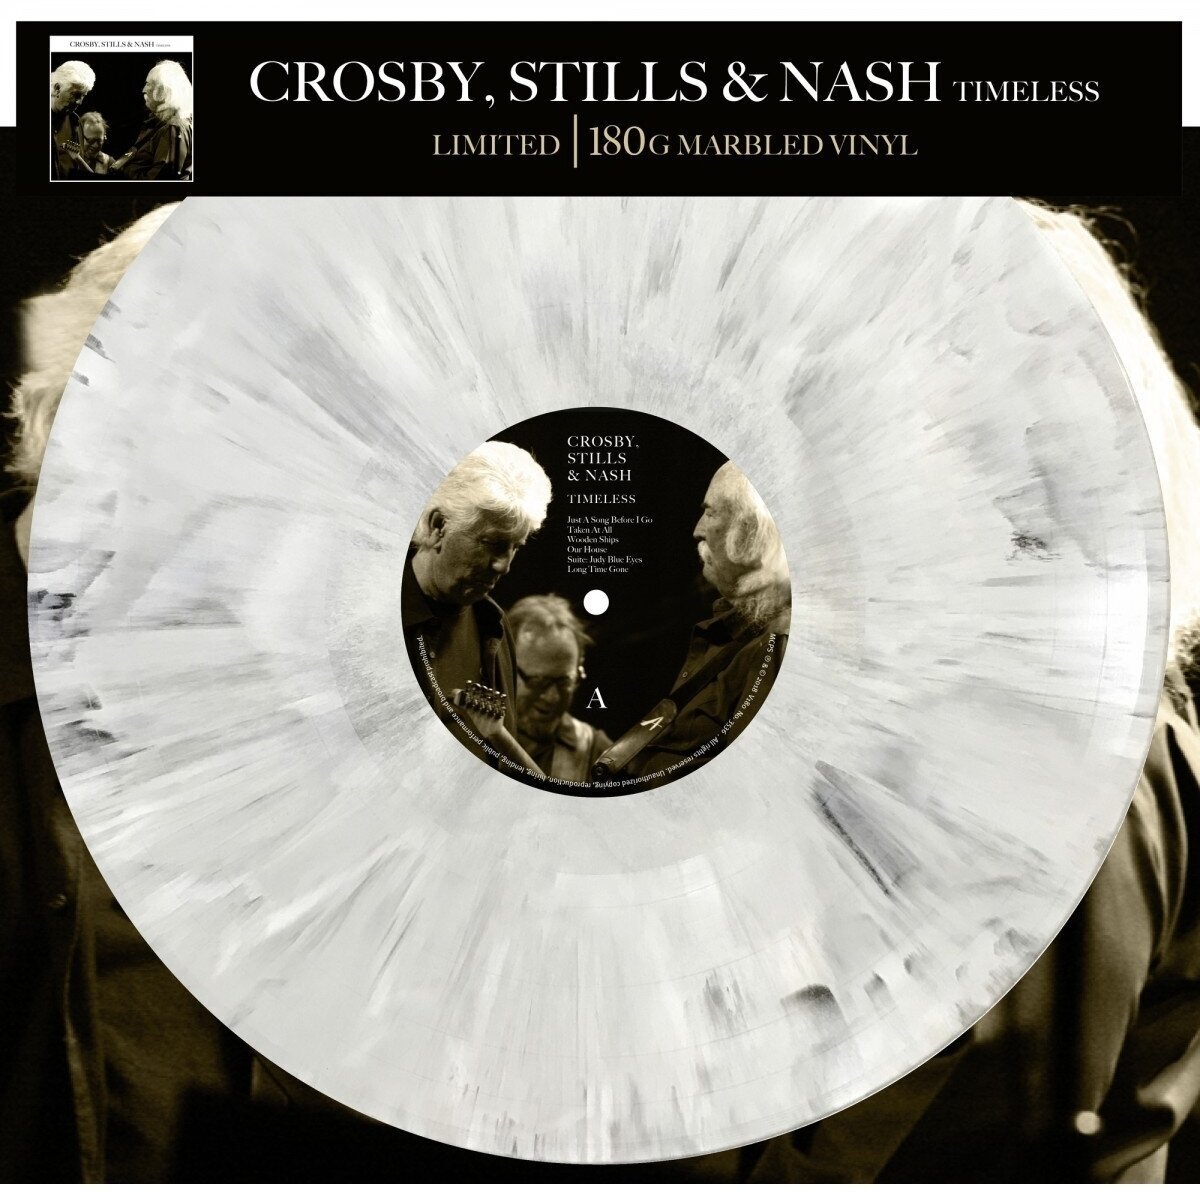 LP Crosby, Stills & Nash - Timeless (The Wonderful Live Recordin) (Limited Edition) (Marbled Coloured) (LP)